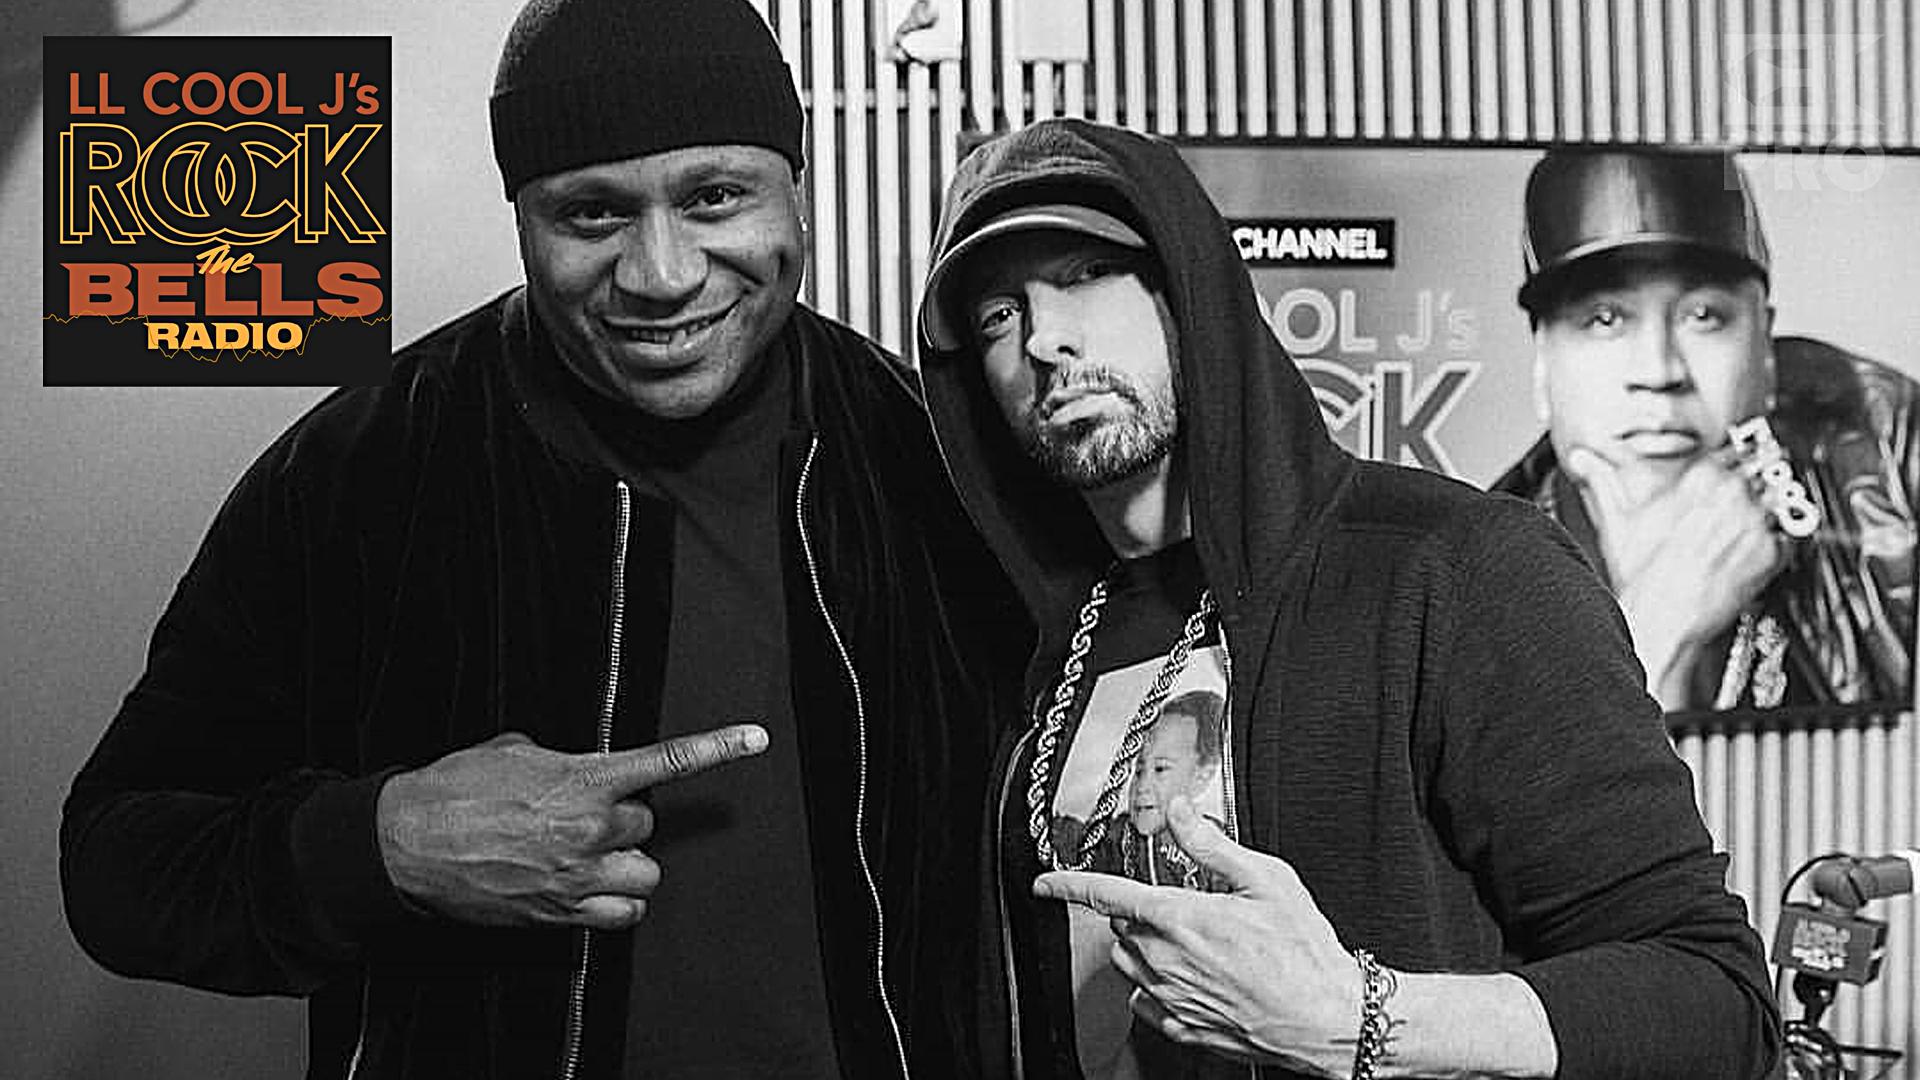 New LL Cool J and Eminem song surfaces online